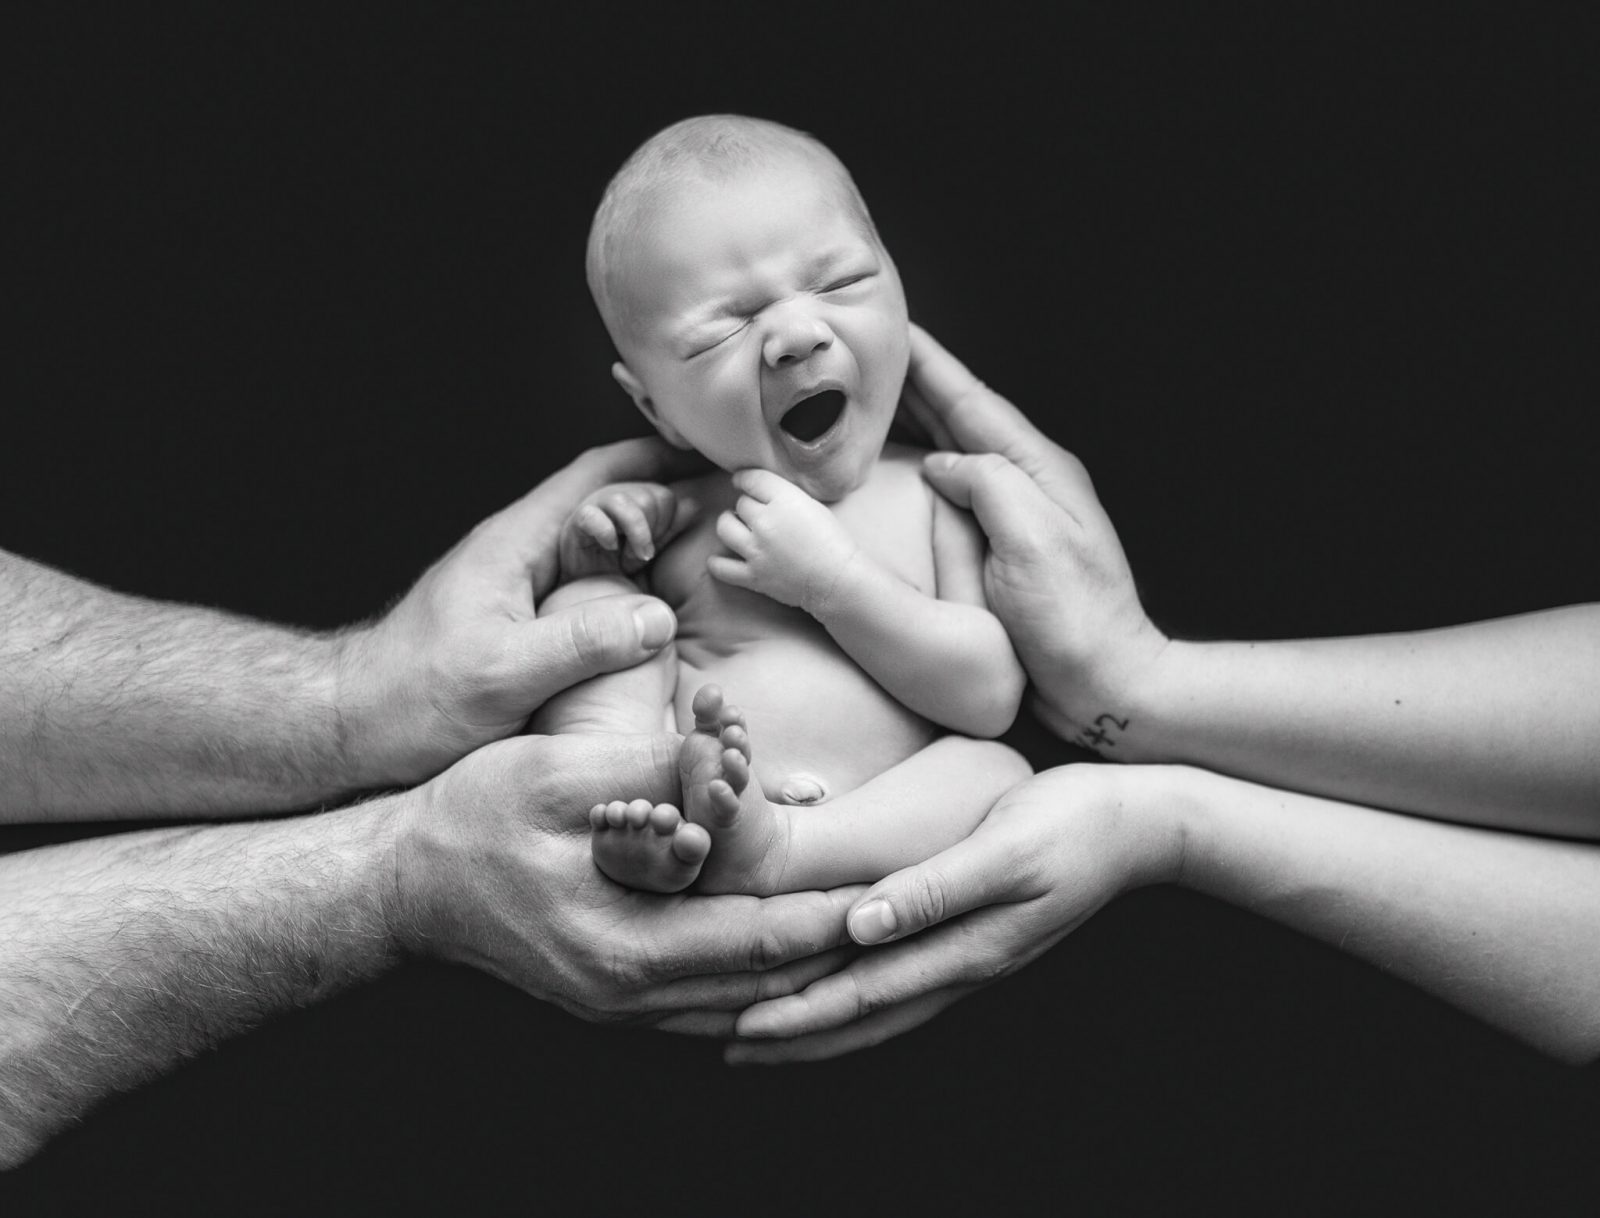 black and white newborn photography by evagud photography